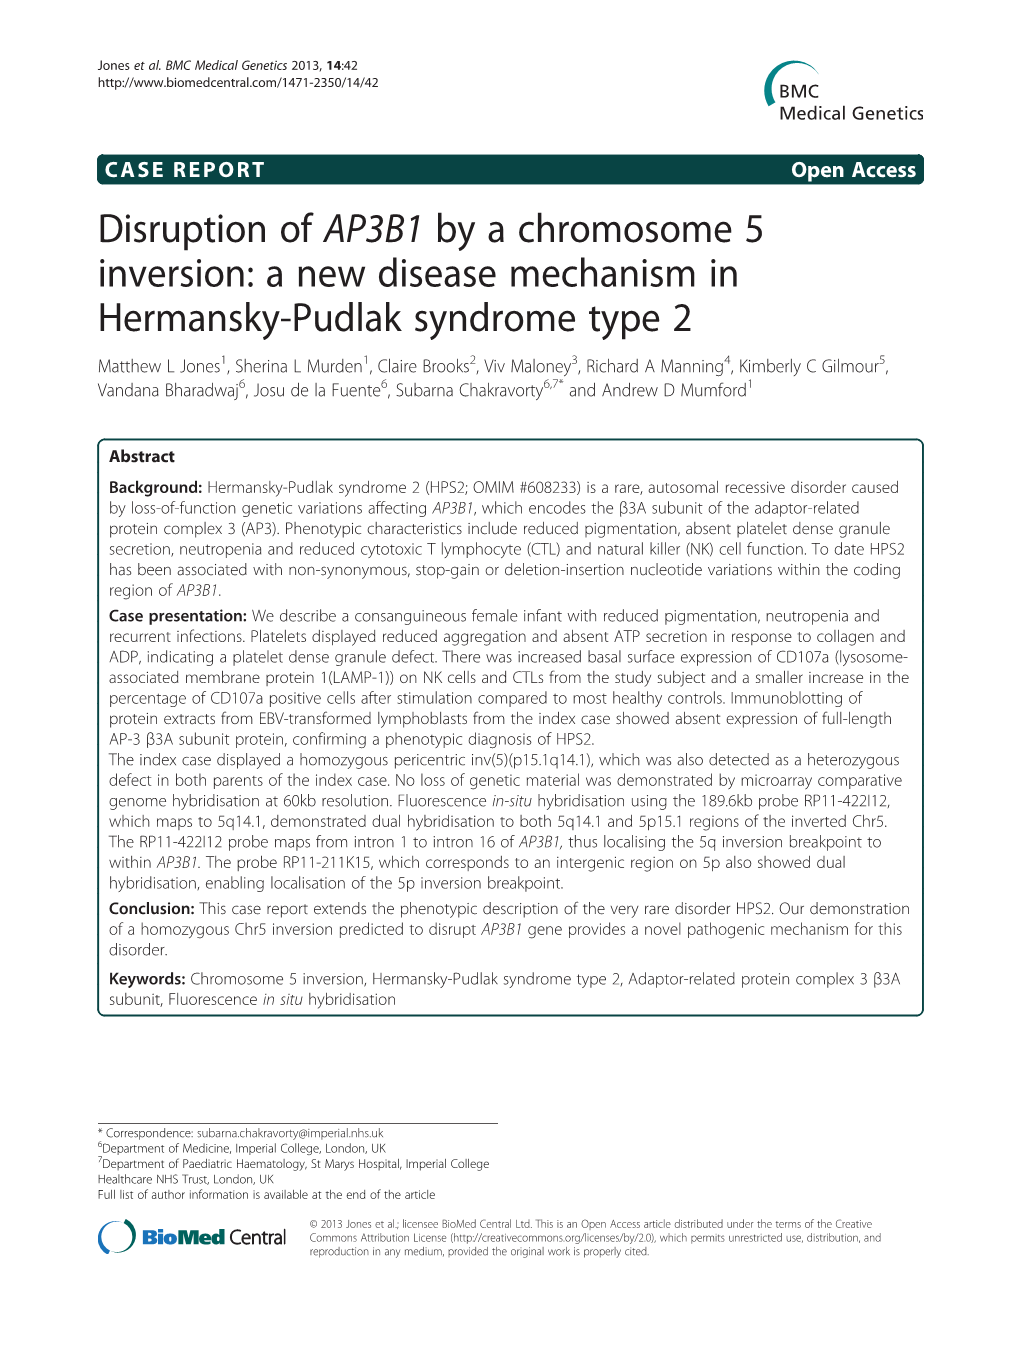 Disruption of AP3B1 by a Chromosome 5 Inversion: a New